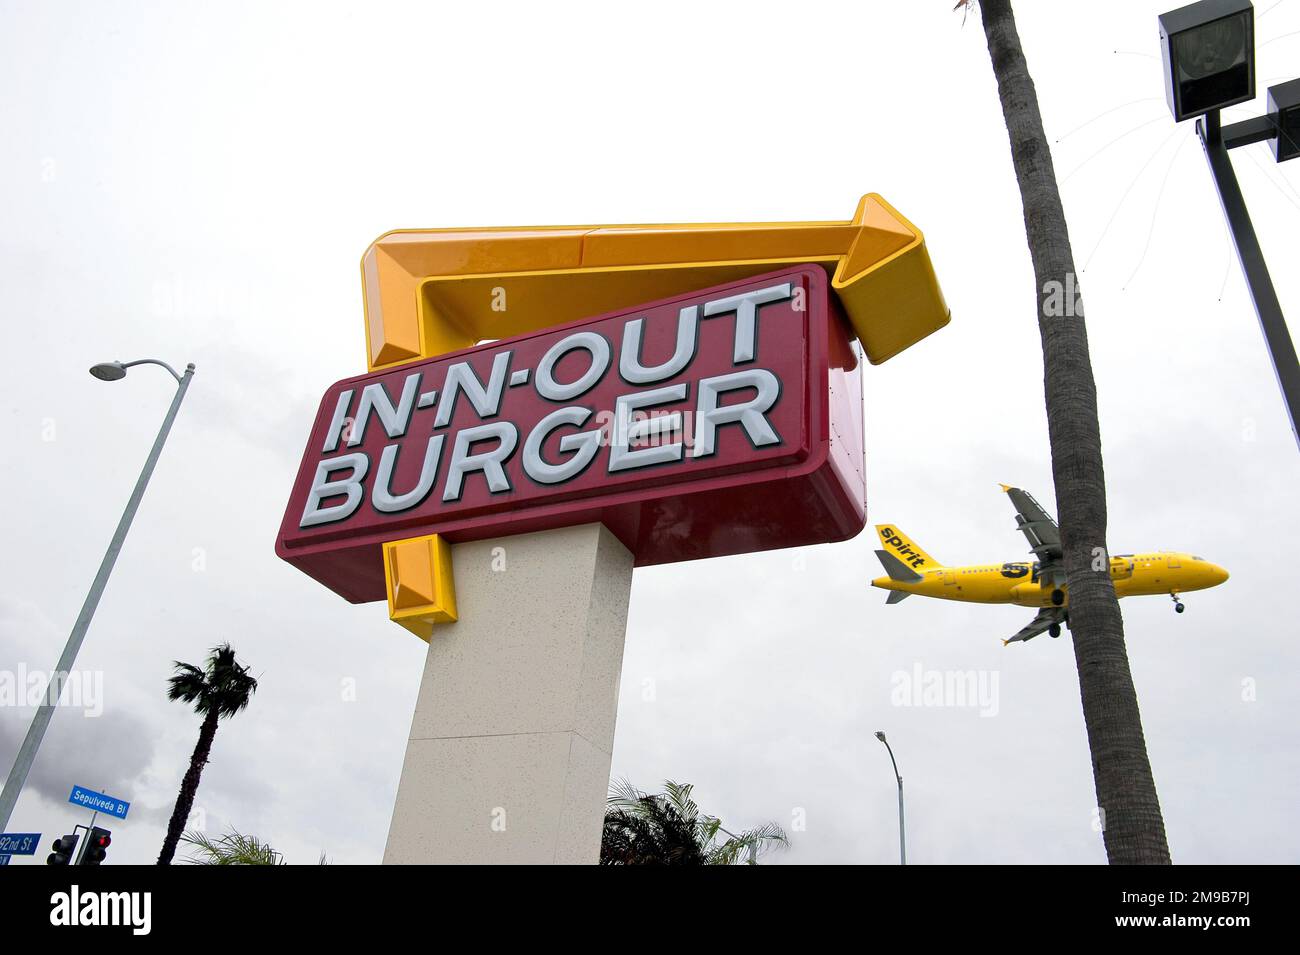 A yellow Spirit Airlines plane is about to land at LAX airport just next to an In-N-Out Burger fast food restaurant in Los Angeles, CA Stock Photo